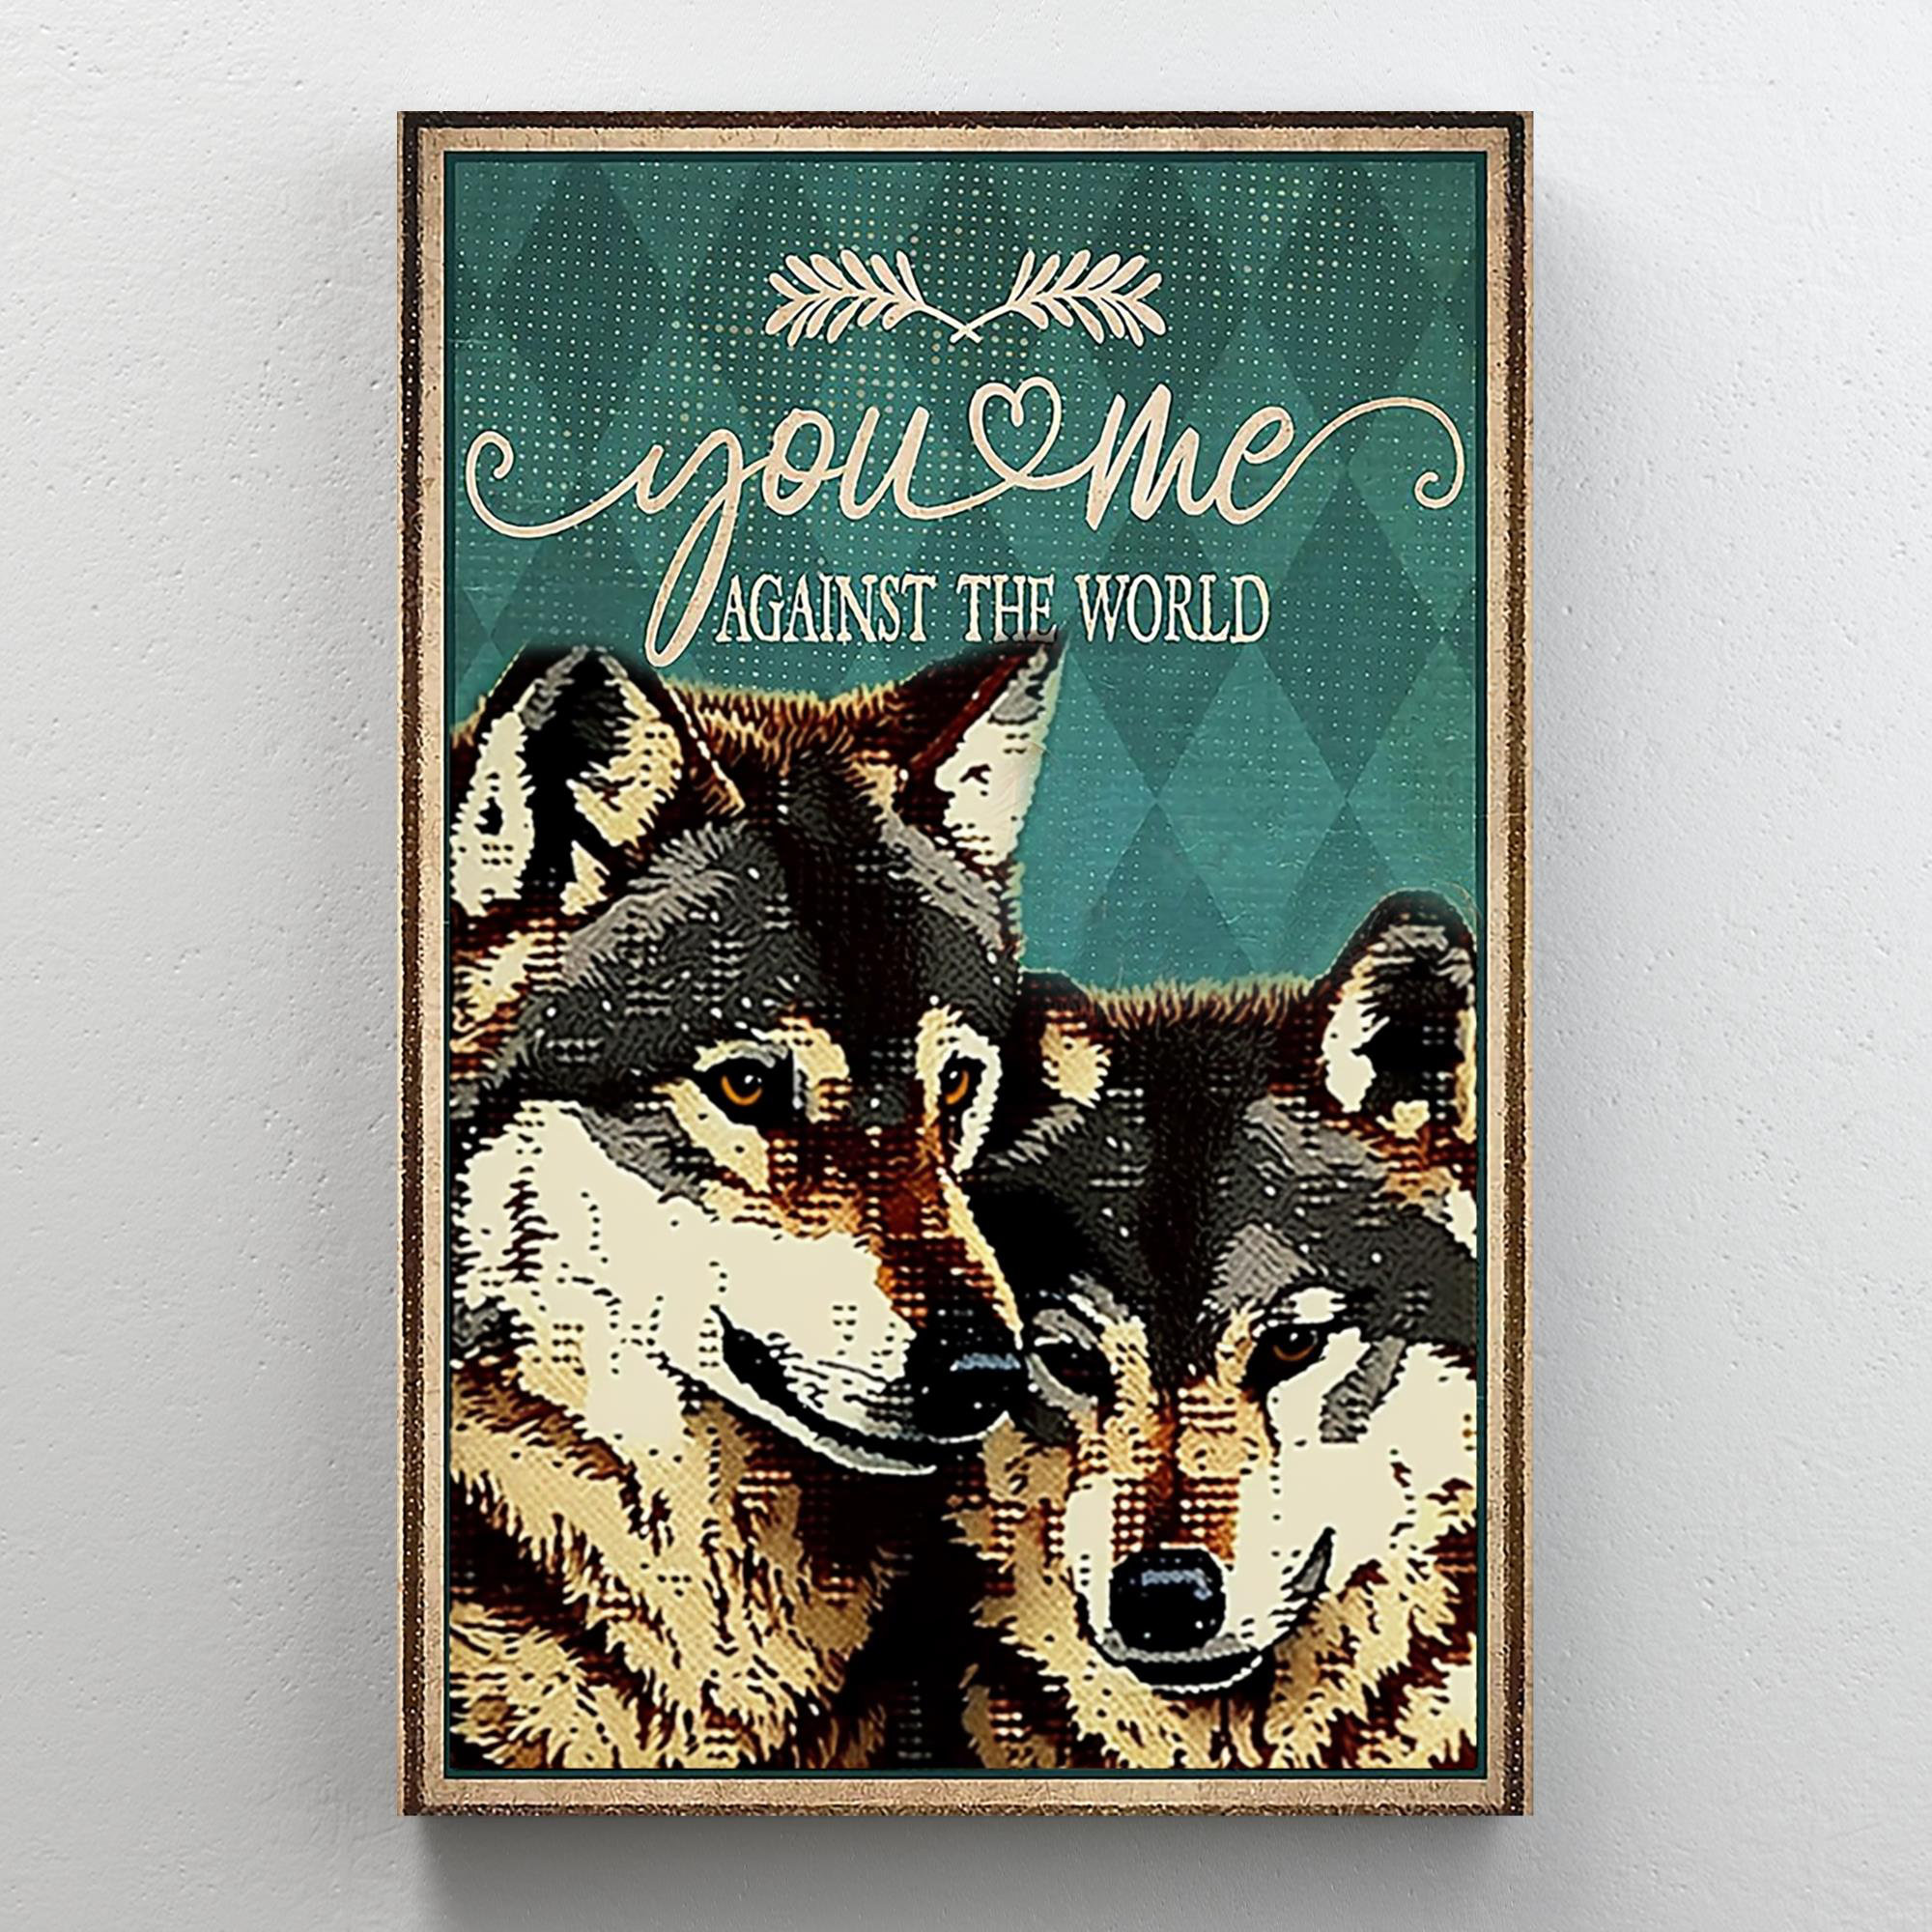 wolf pictures you can print